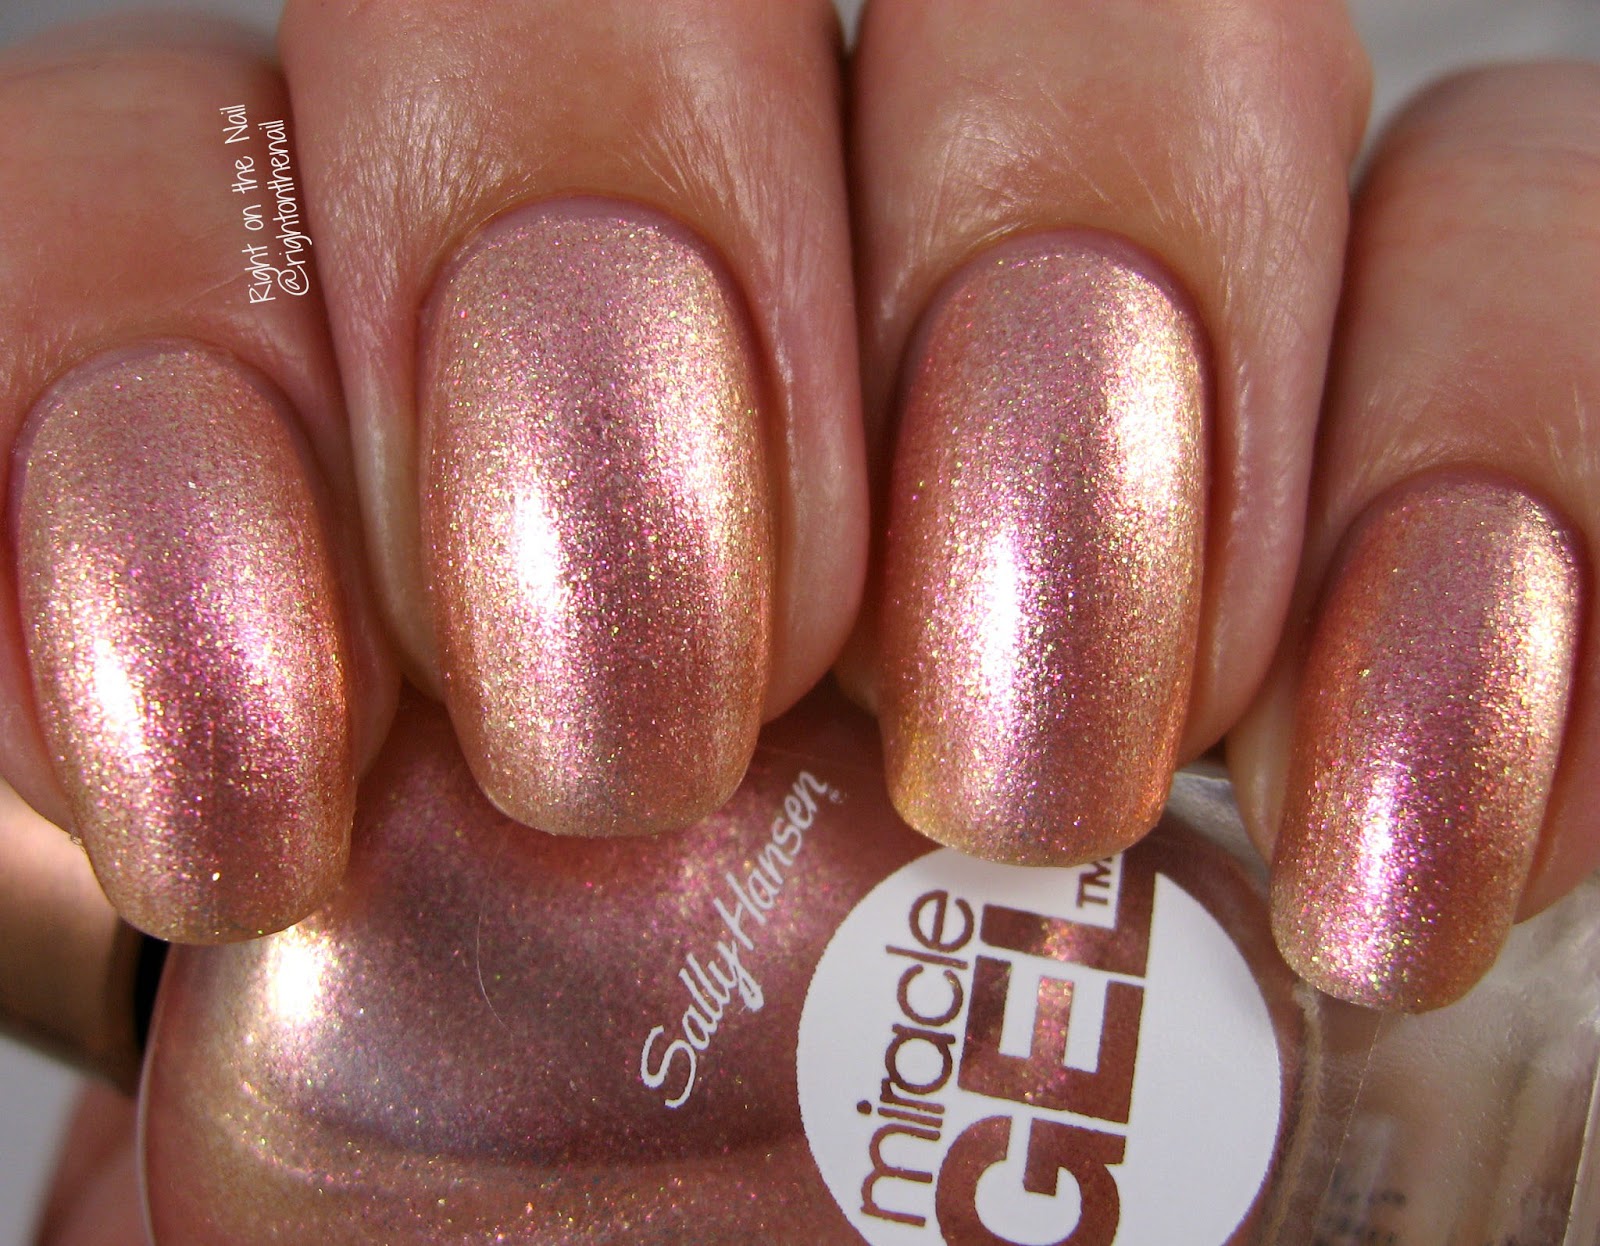 3. Sally Hansen Miracle Gel in "Orchid-ing Aside" - wide 6